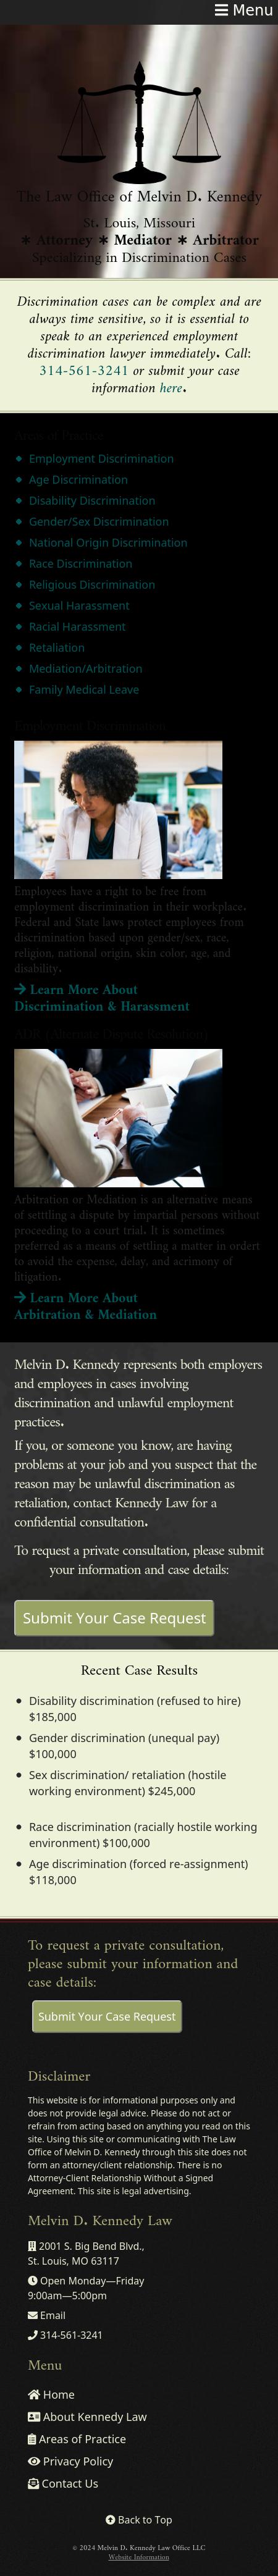 The Law Office of Melvin D. Kennedy, LLC - Saint Louis MO Lawyers